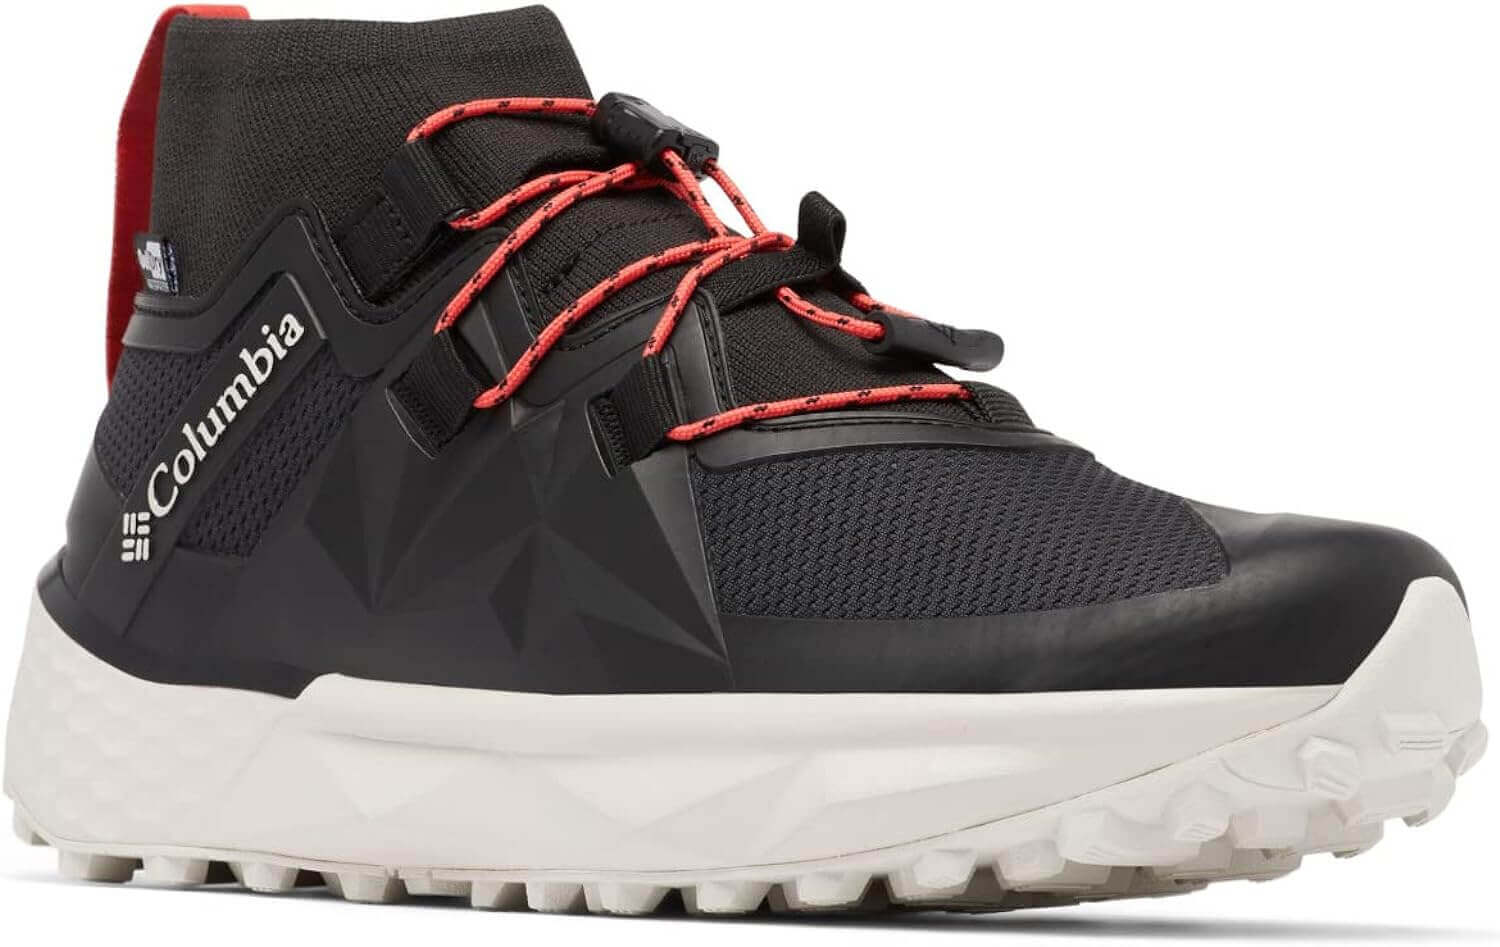 Shop The Latest >Columbia Women's Facet 75 Alpha Outdry Hiking Shoe > *Only $130.41*> From The Top Brand > *Columbial* > Shop Now and Get Free Shipping On Orders Over $45.00 >*Shop Earth Foot*